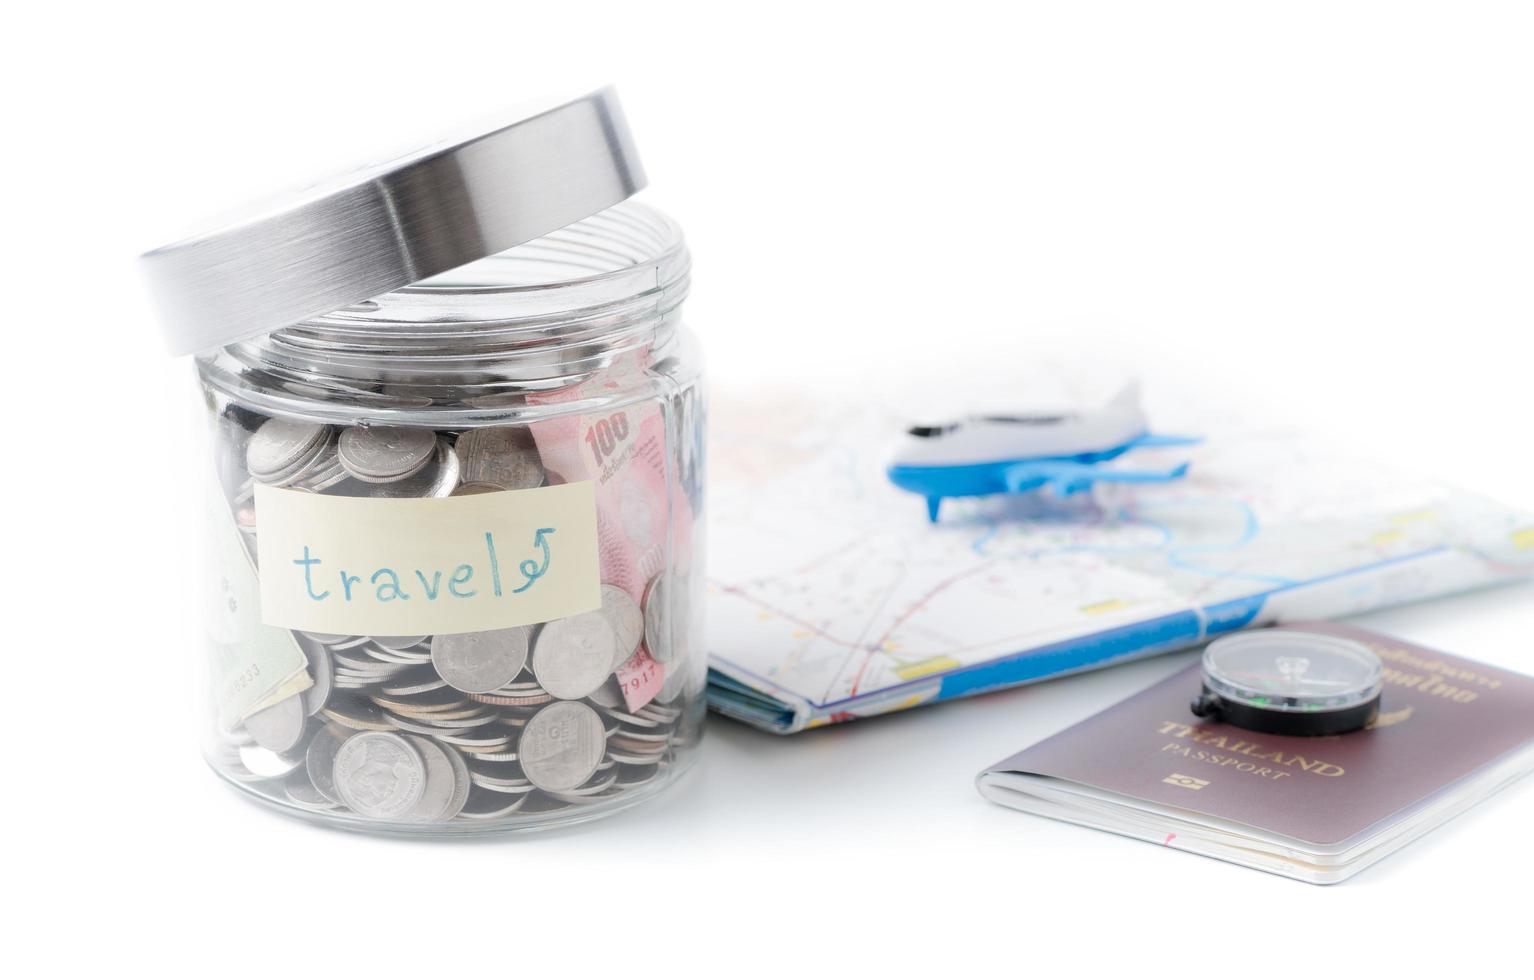 Travel budget concept. travel money savings in a glass jar. photo